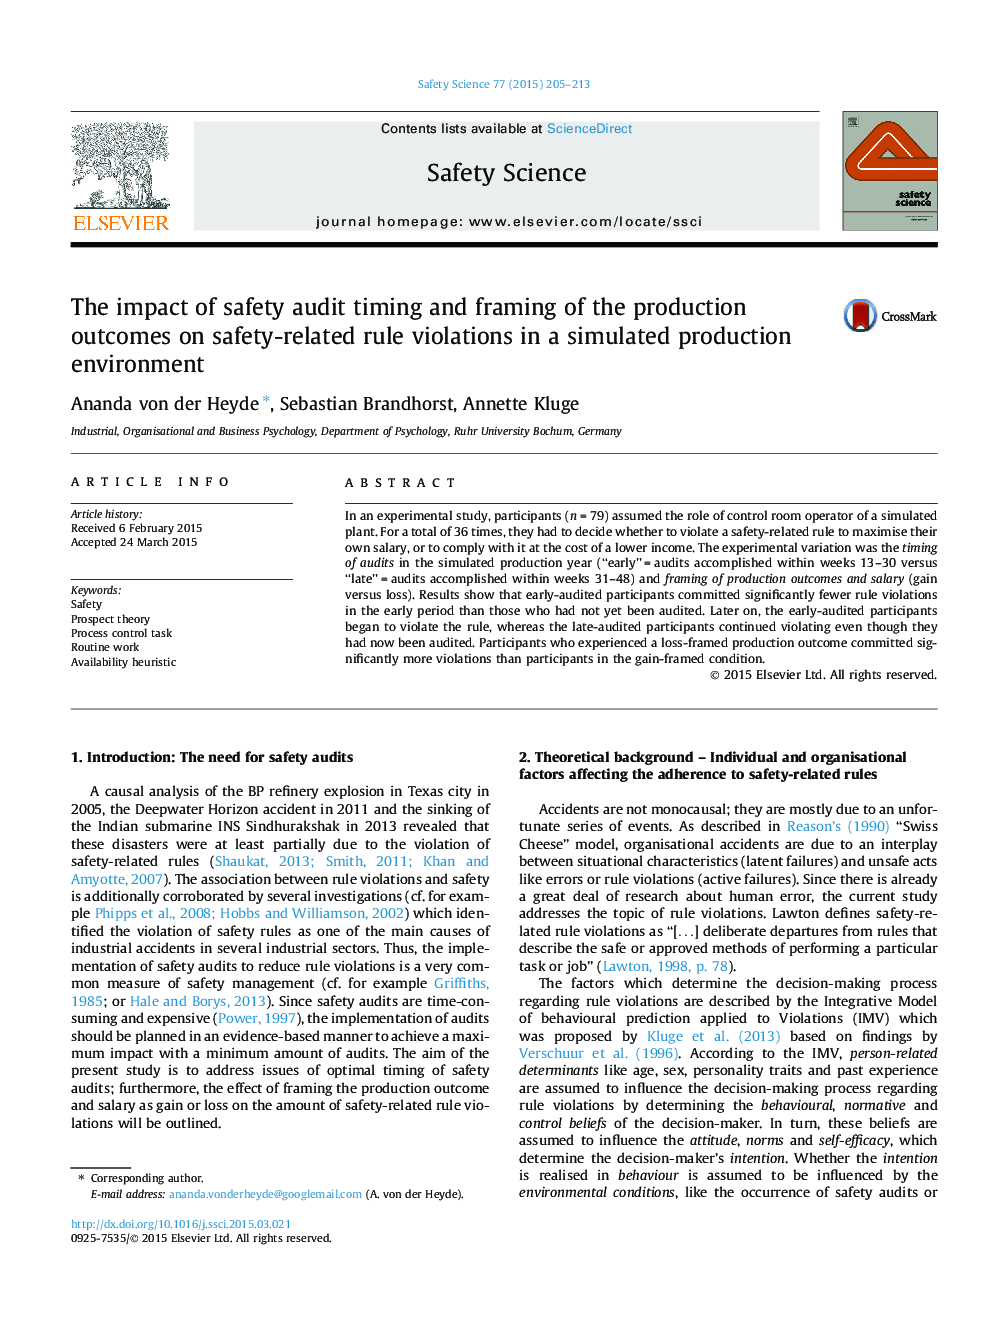 The impact of safety audit timing and framing of the production outcomes on safety-related rule violations in a simulated production environment